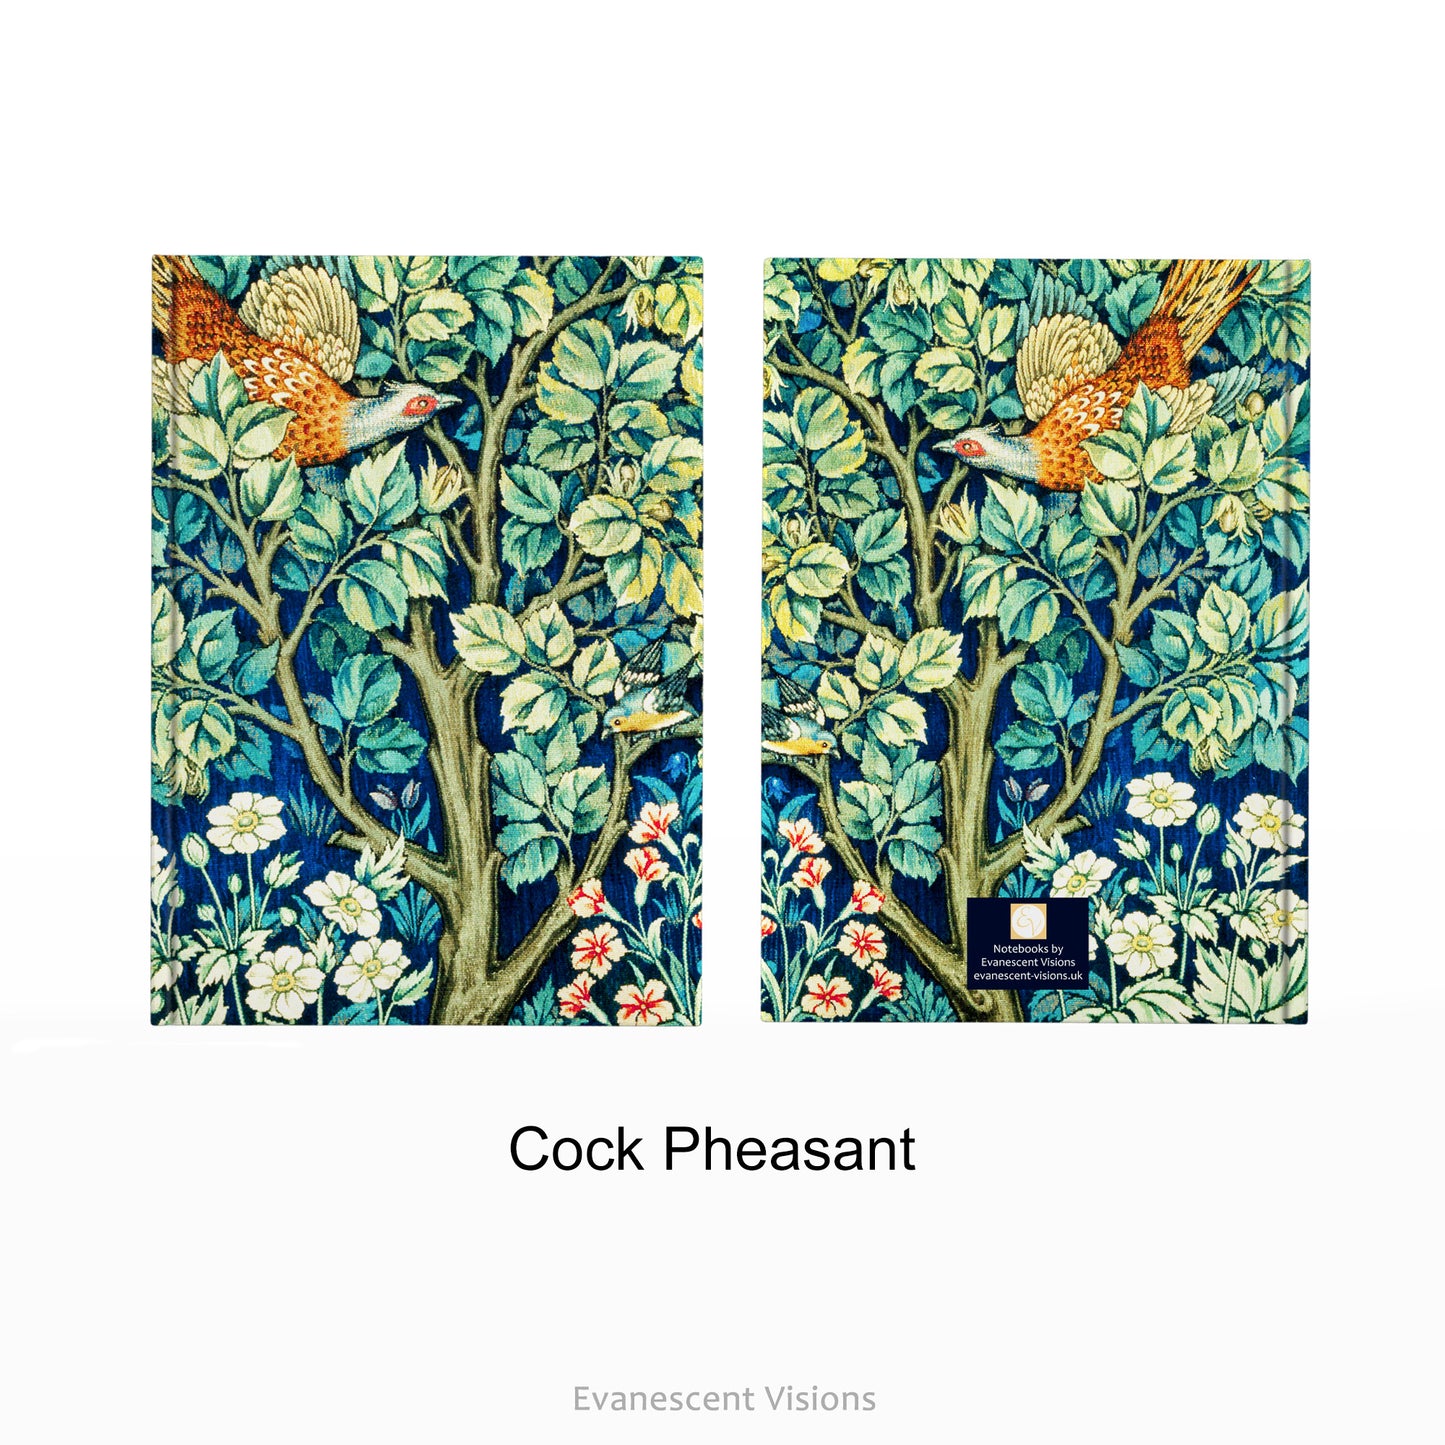 William Morris Patterned Hardcover Notebook with Cock Pheasant design